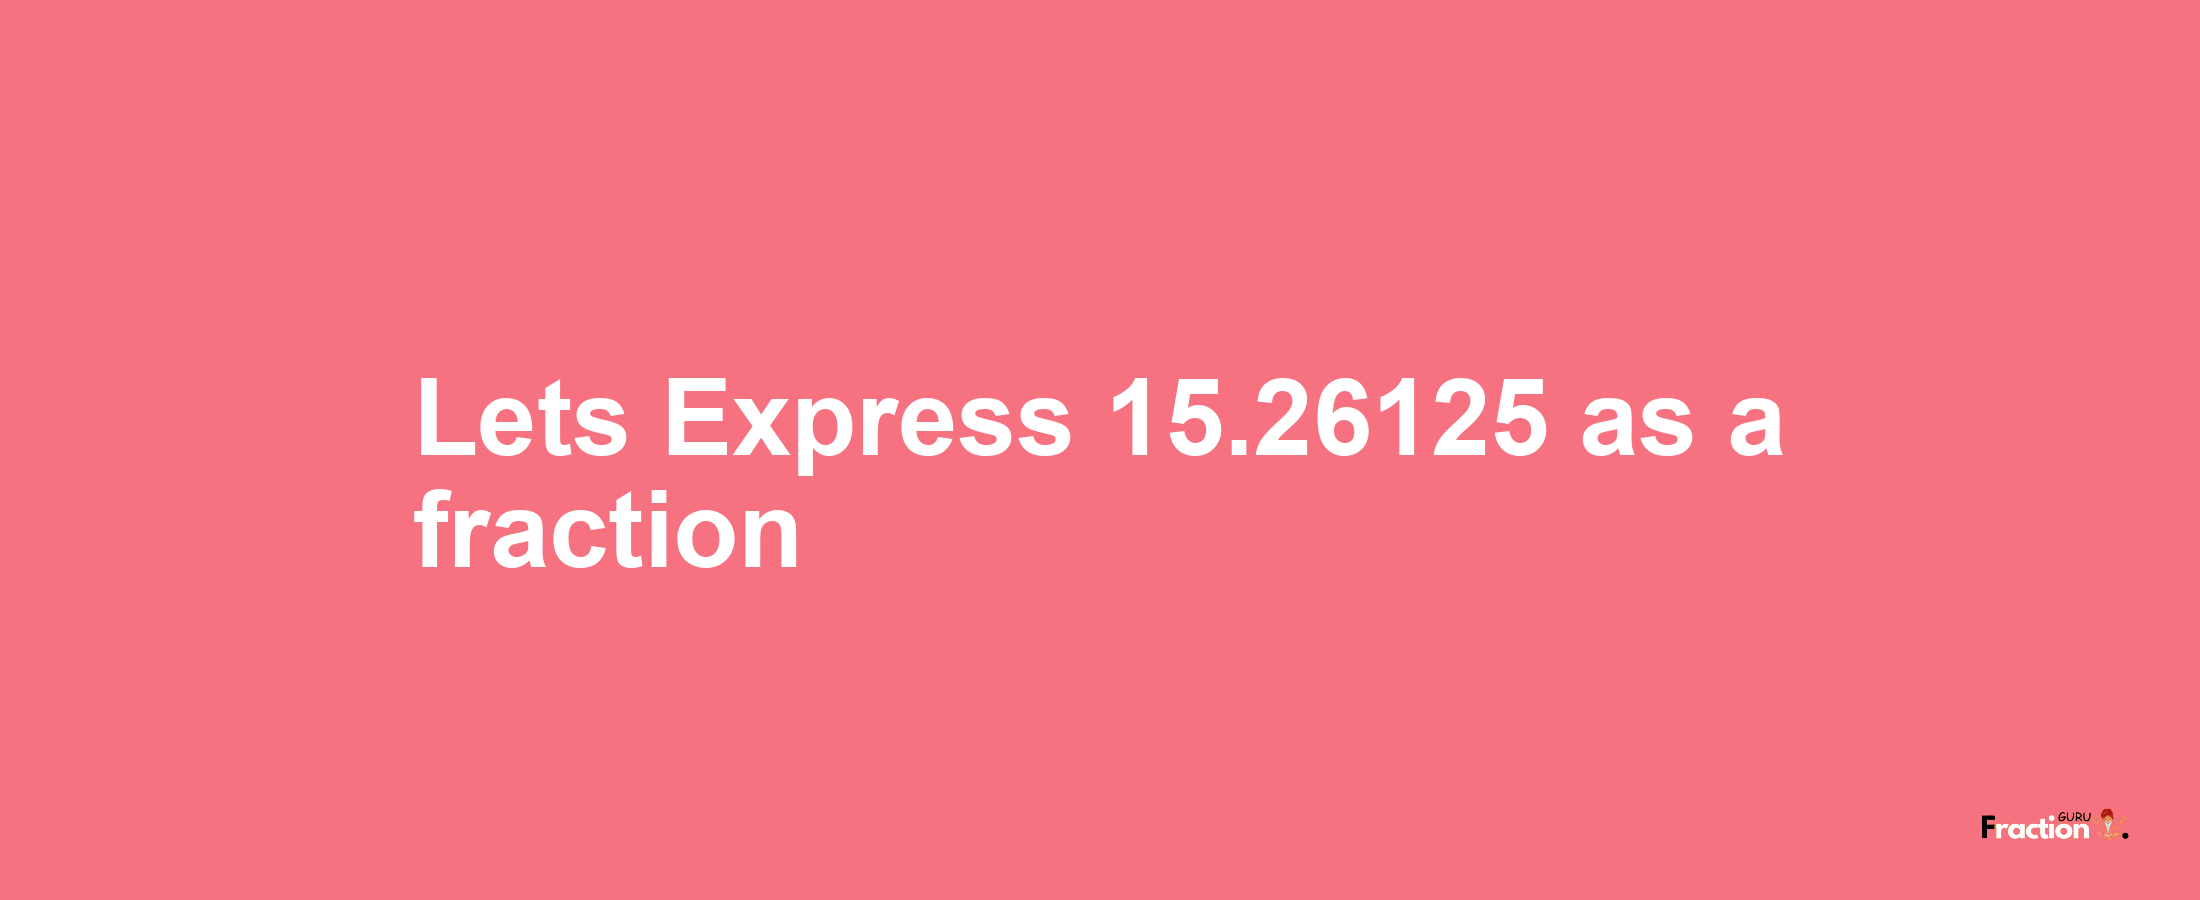 Lets Express 15.26125 as afraction